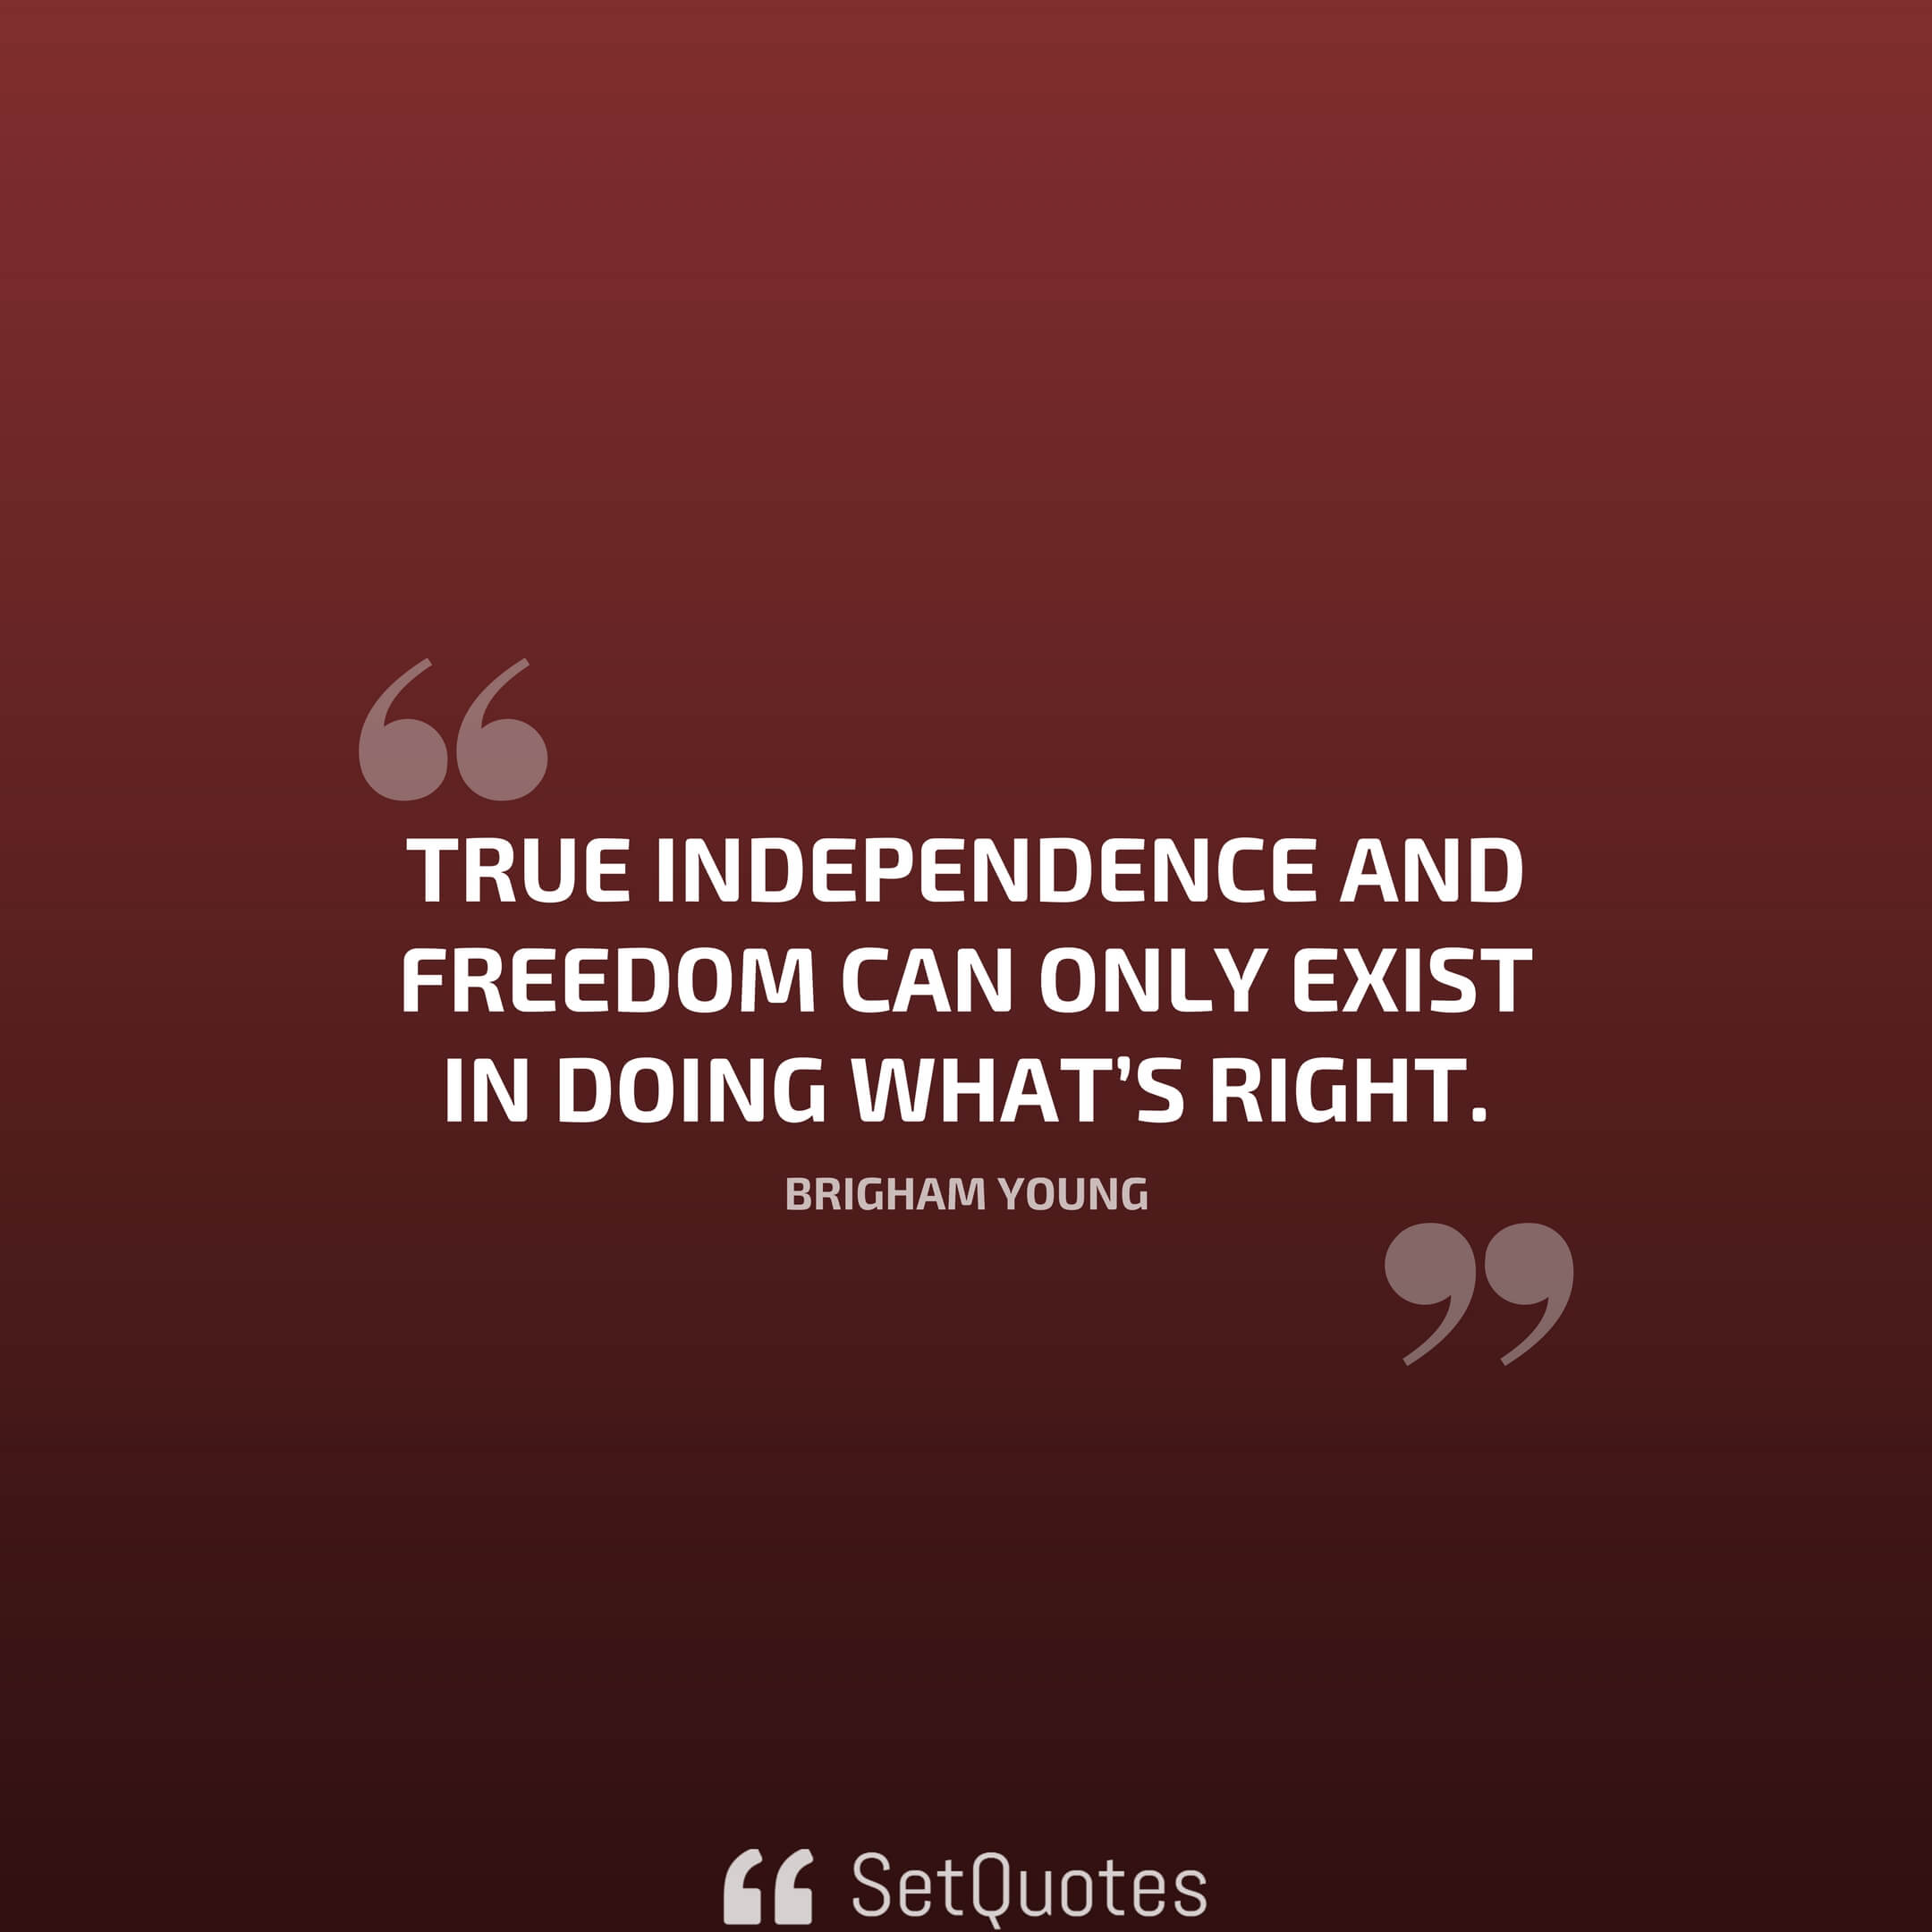 True independence and freedom can only exist in doing what's right. – Brigham Young